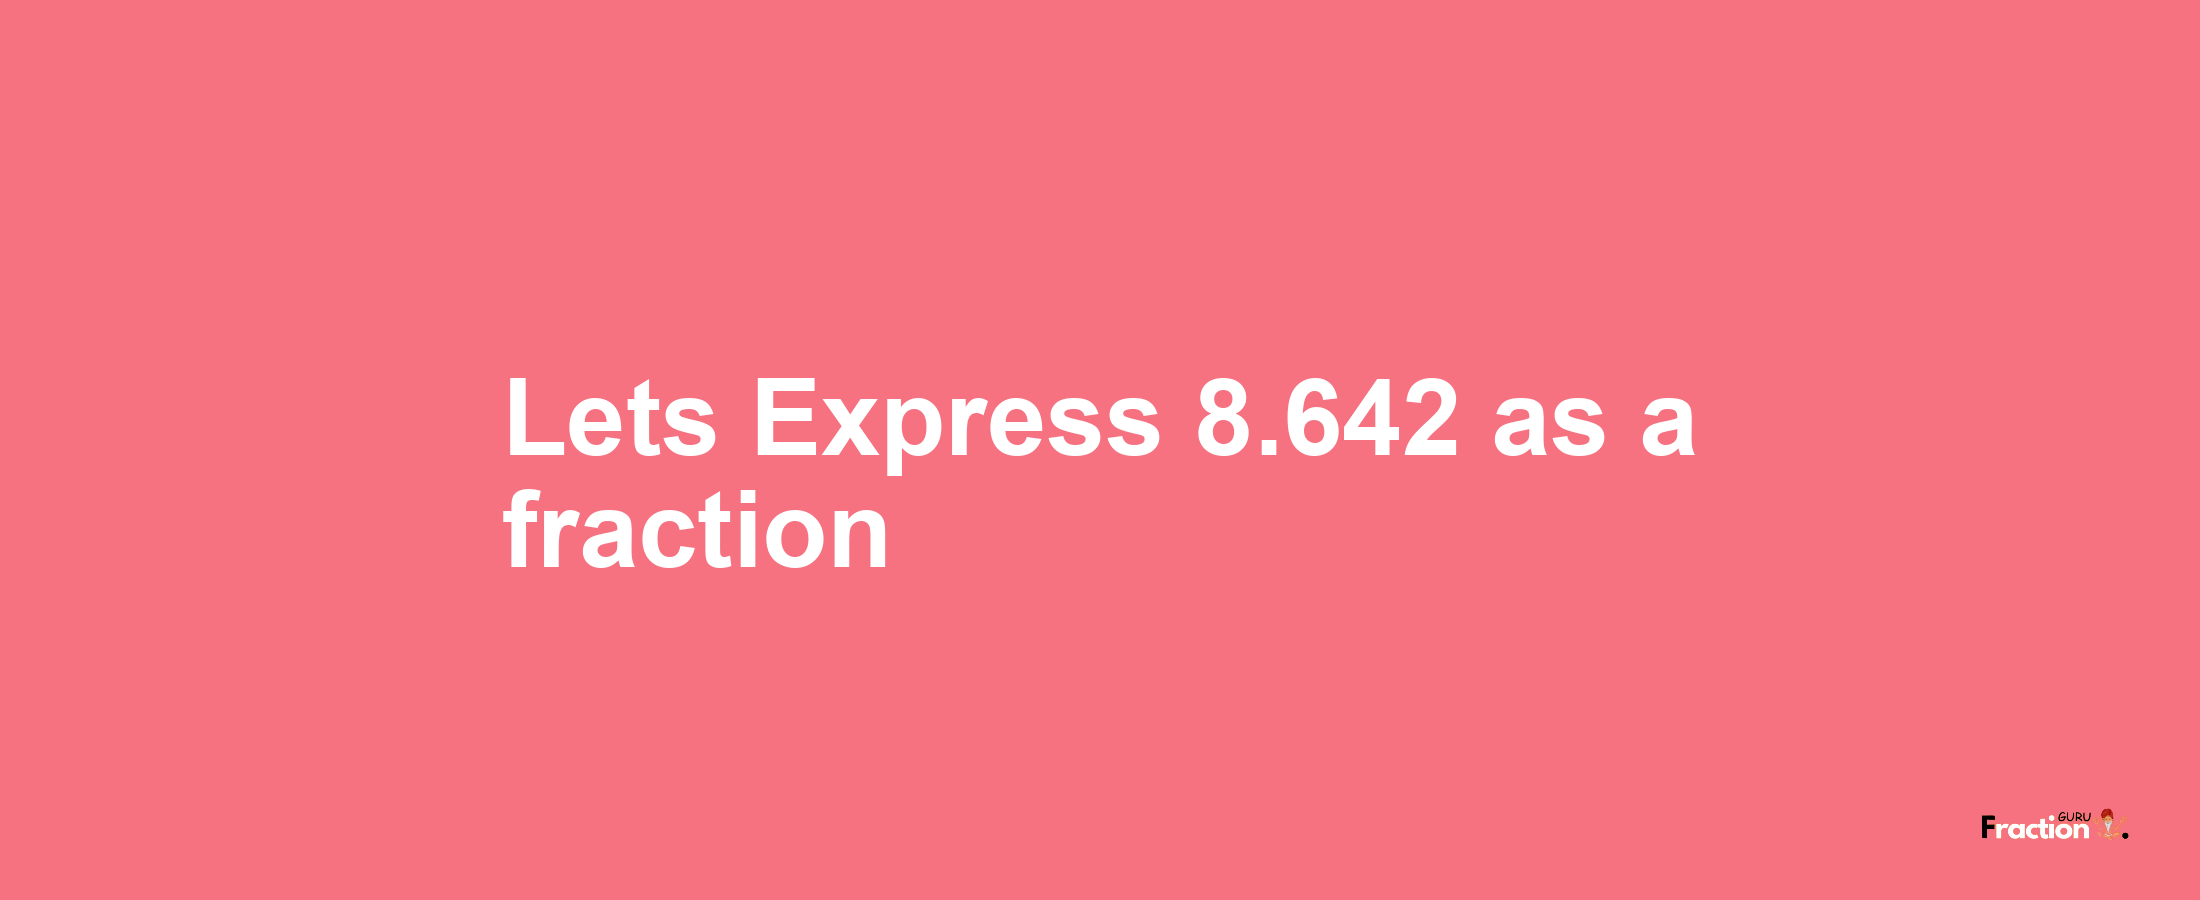 Lets Express 8.642 as afraction